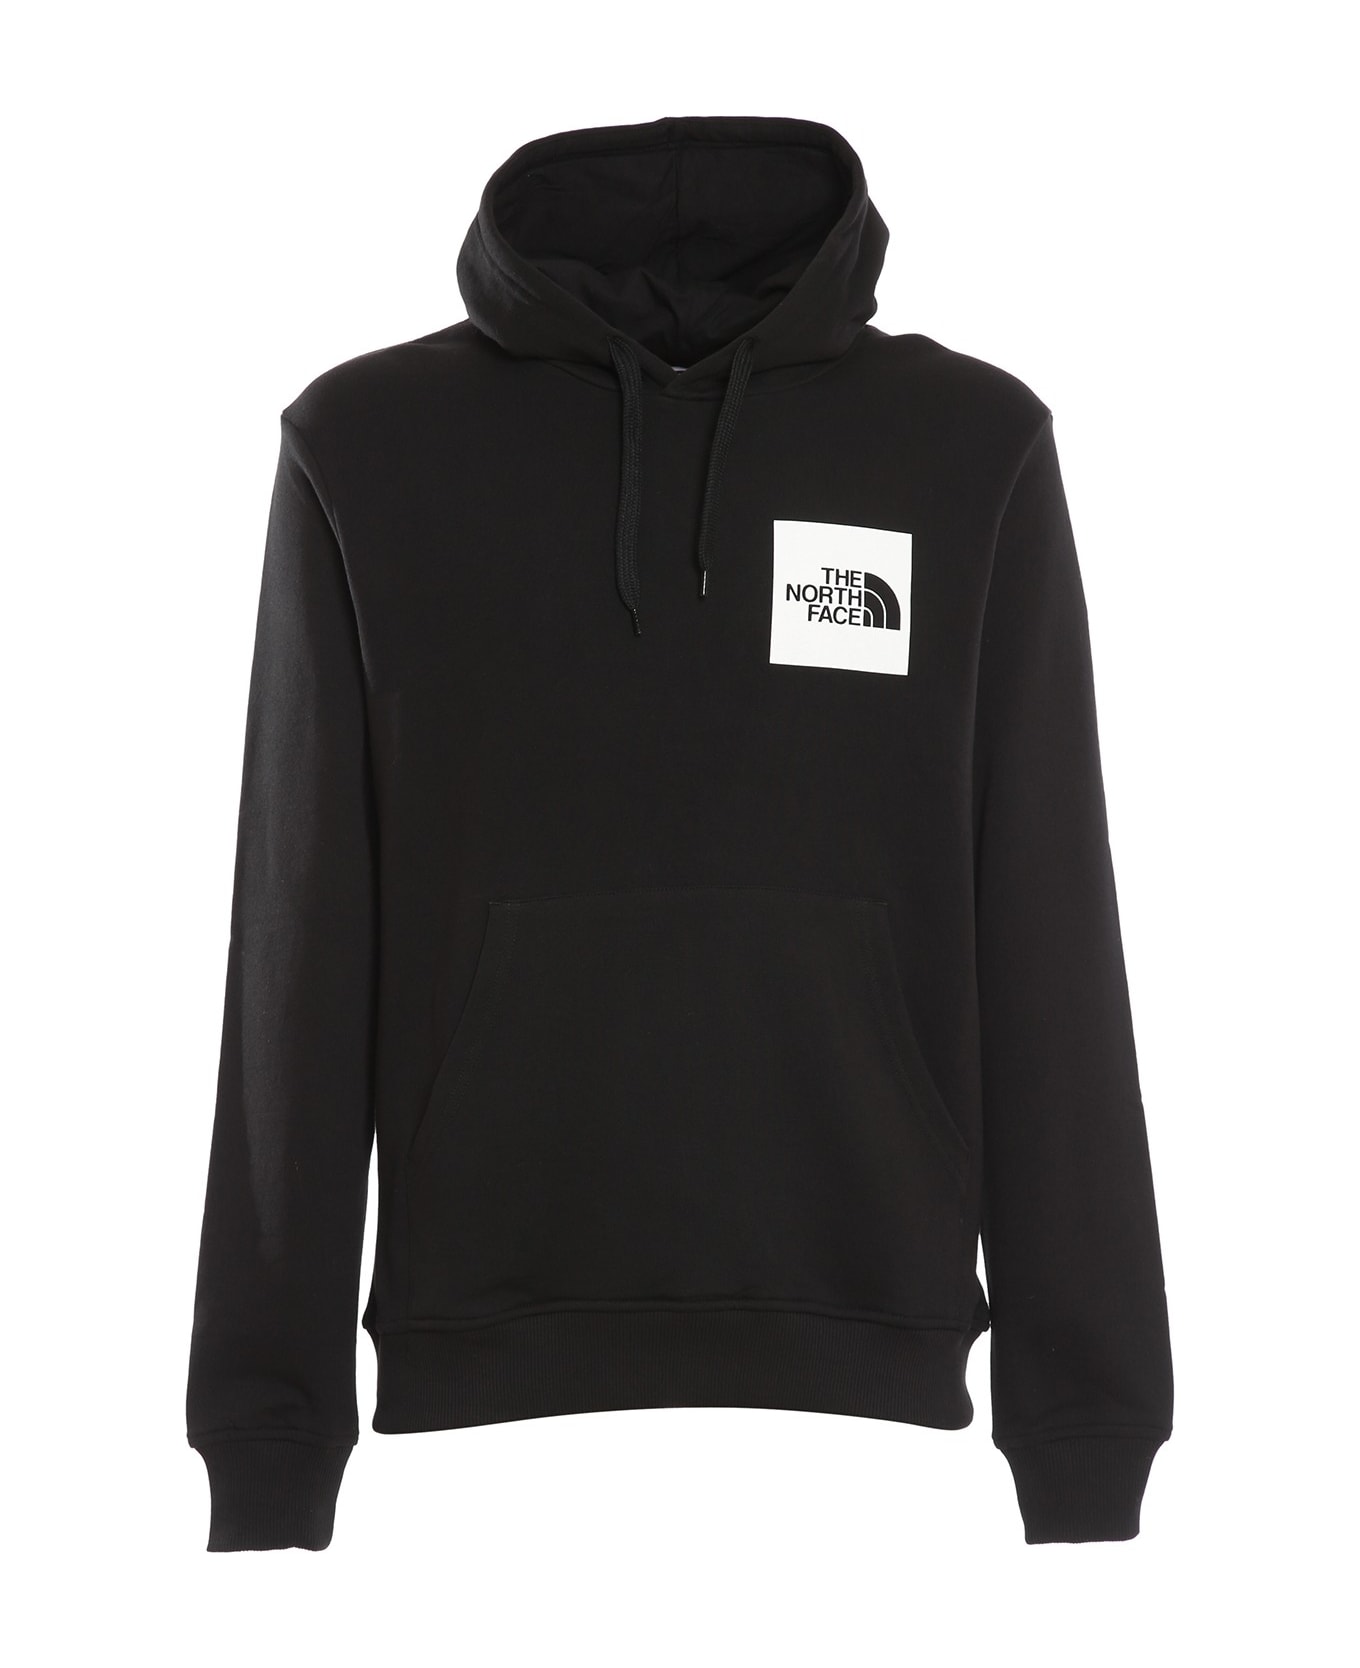 The North Face M Fine Hoodie - Tnf Black